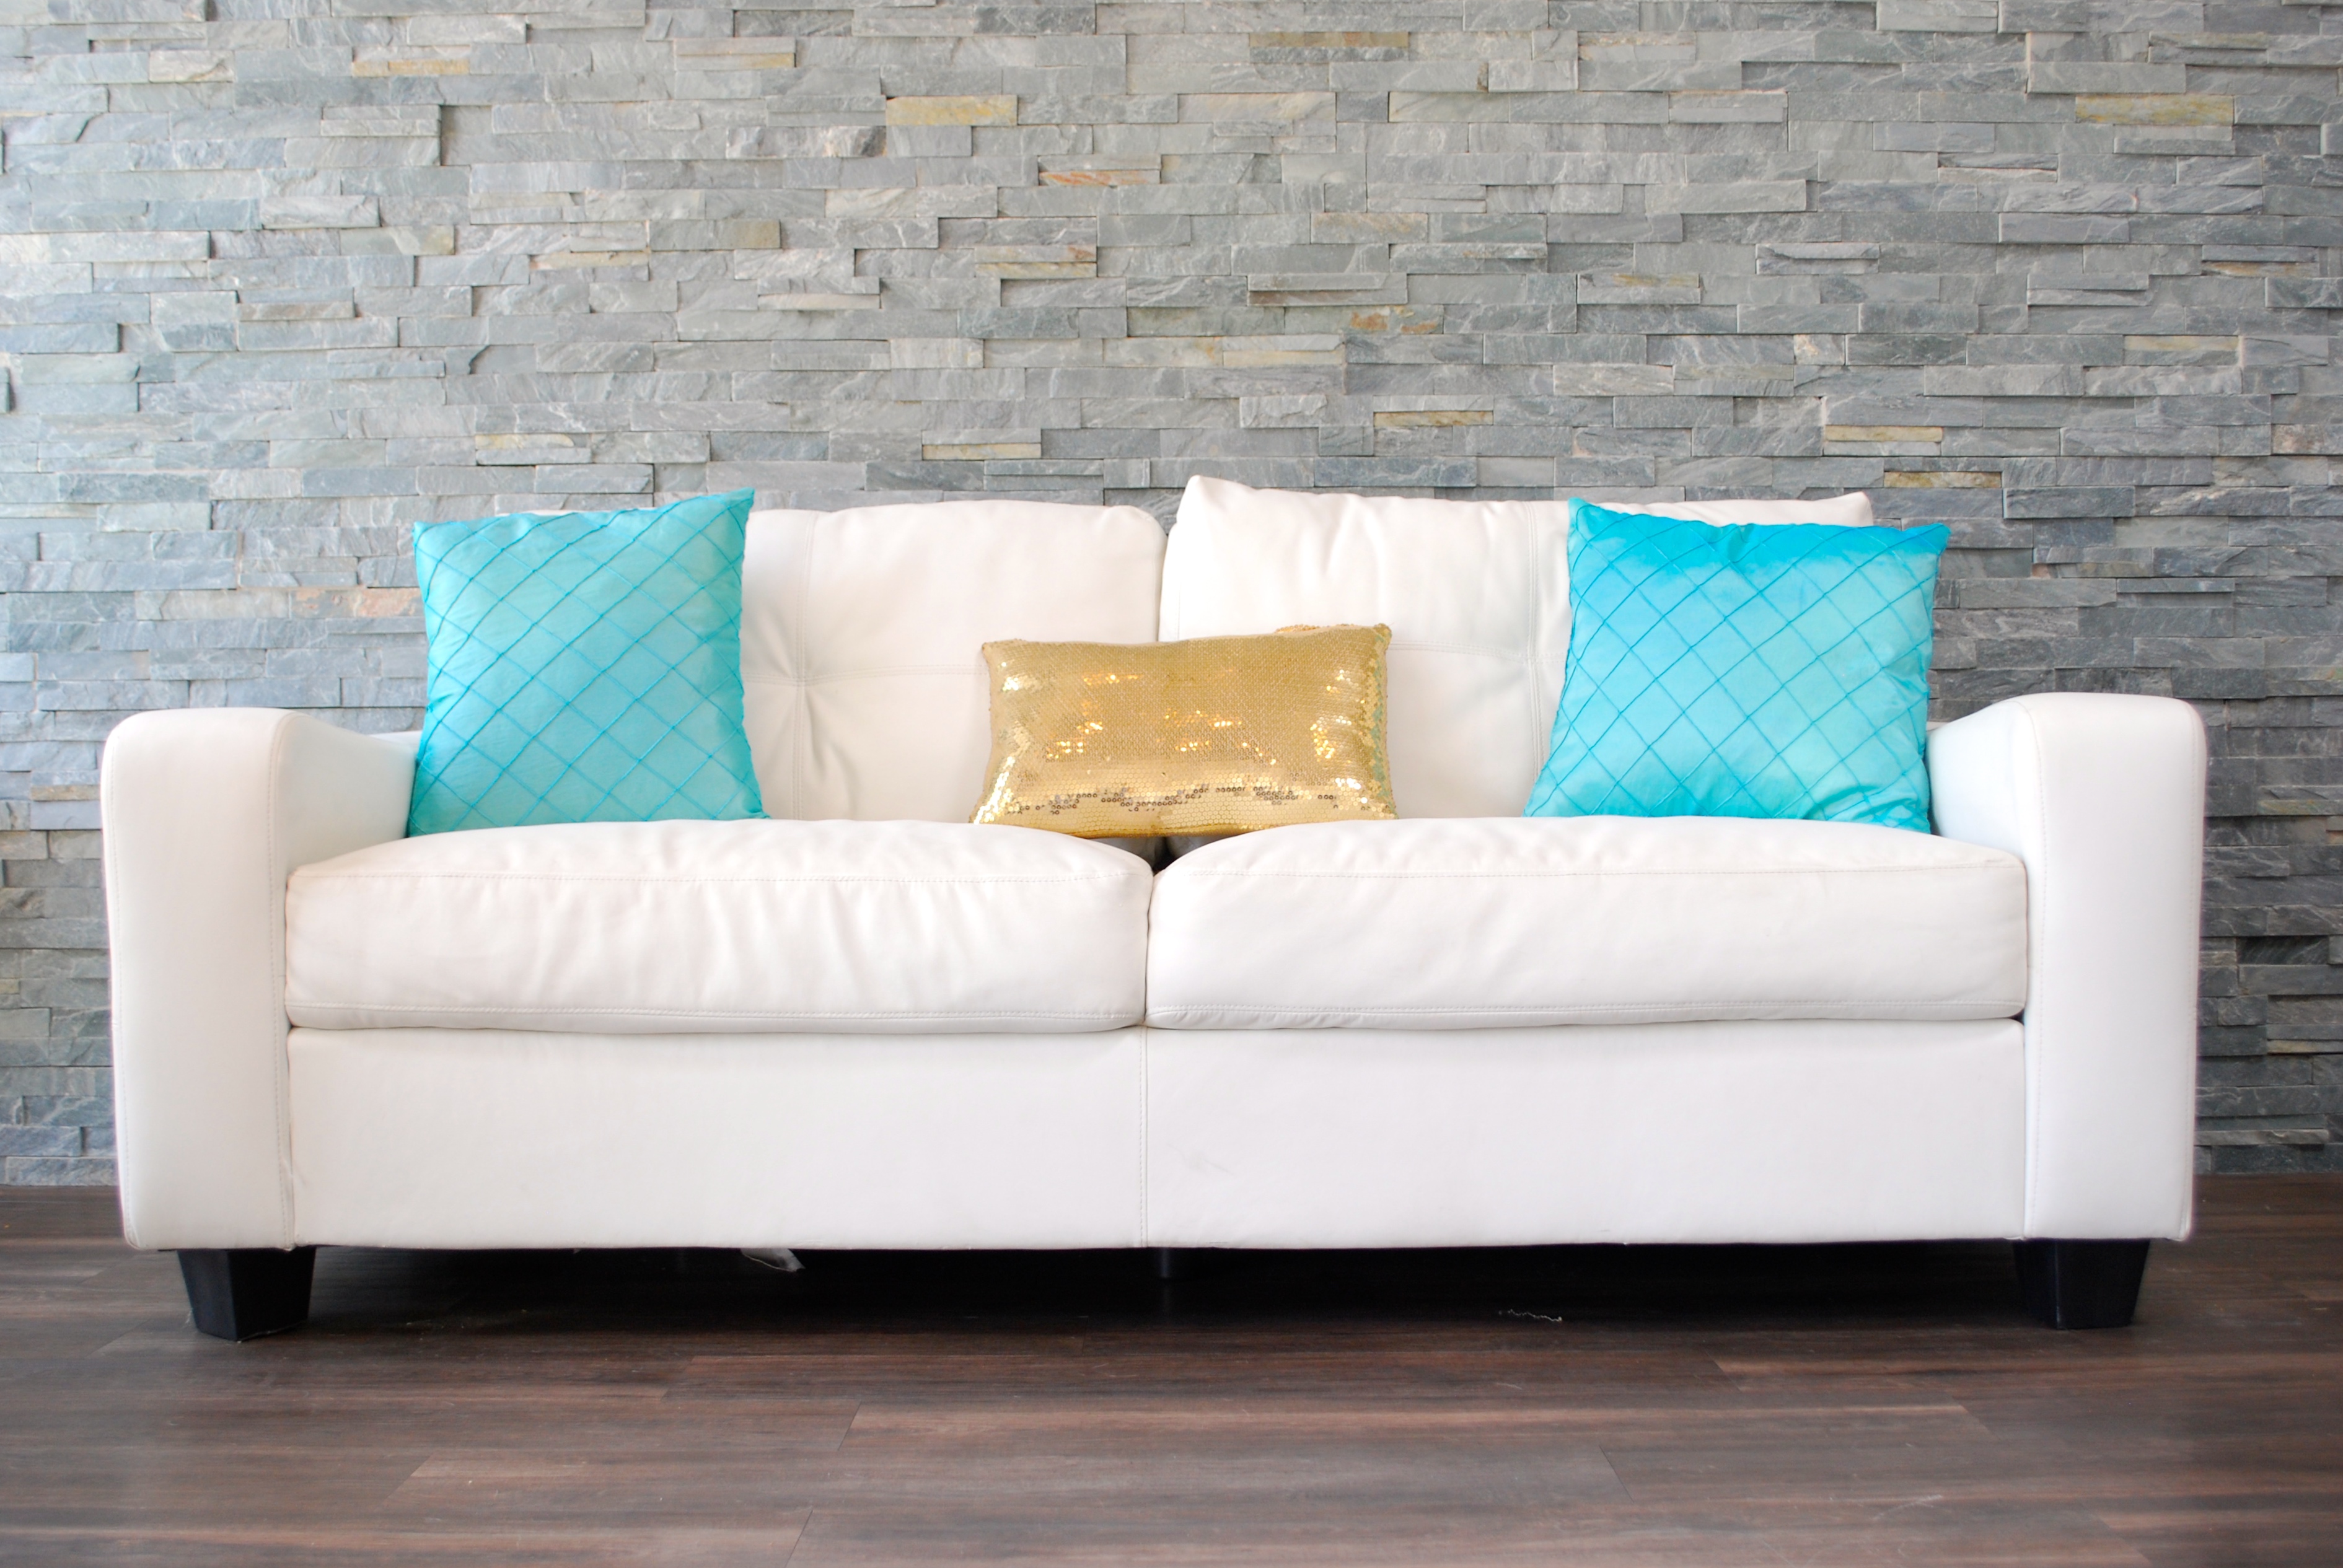 White and Blue Pillows on White Couch - Transitional - Living Room